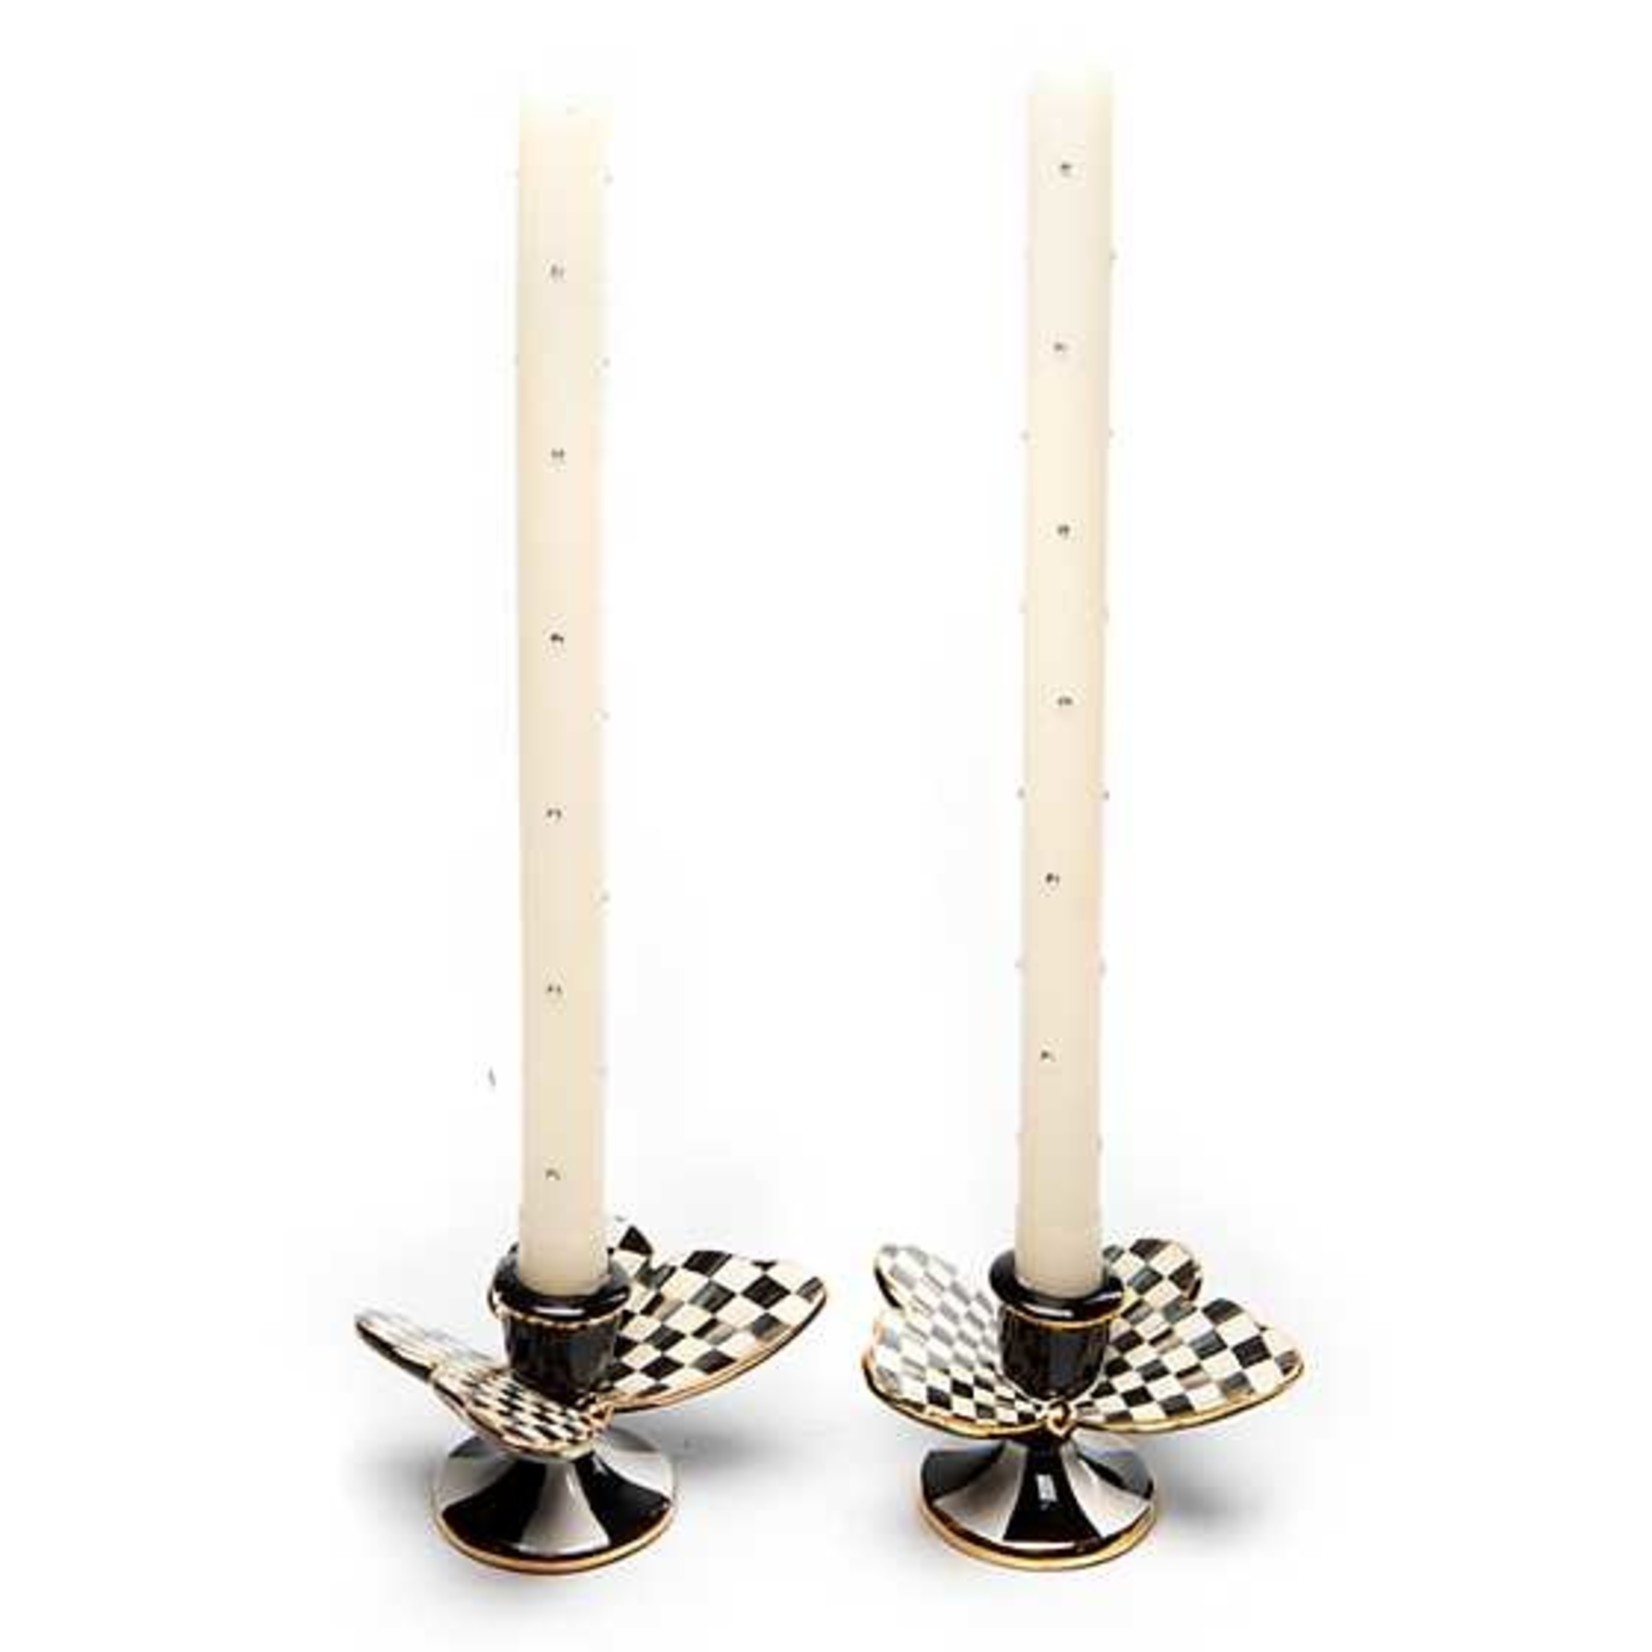 MacKenzie Childs Courtly Check Butterfly Candle Holders - Set of 2